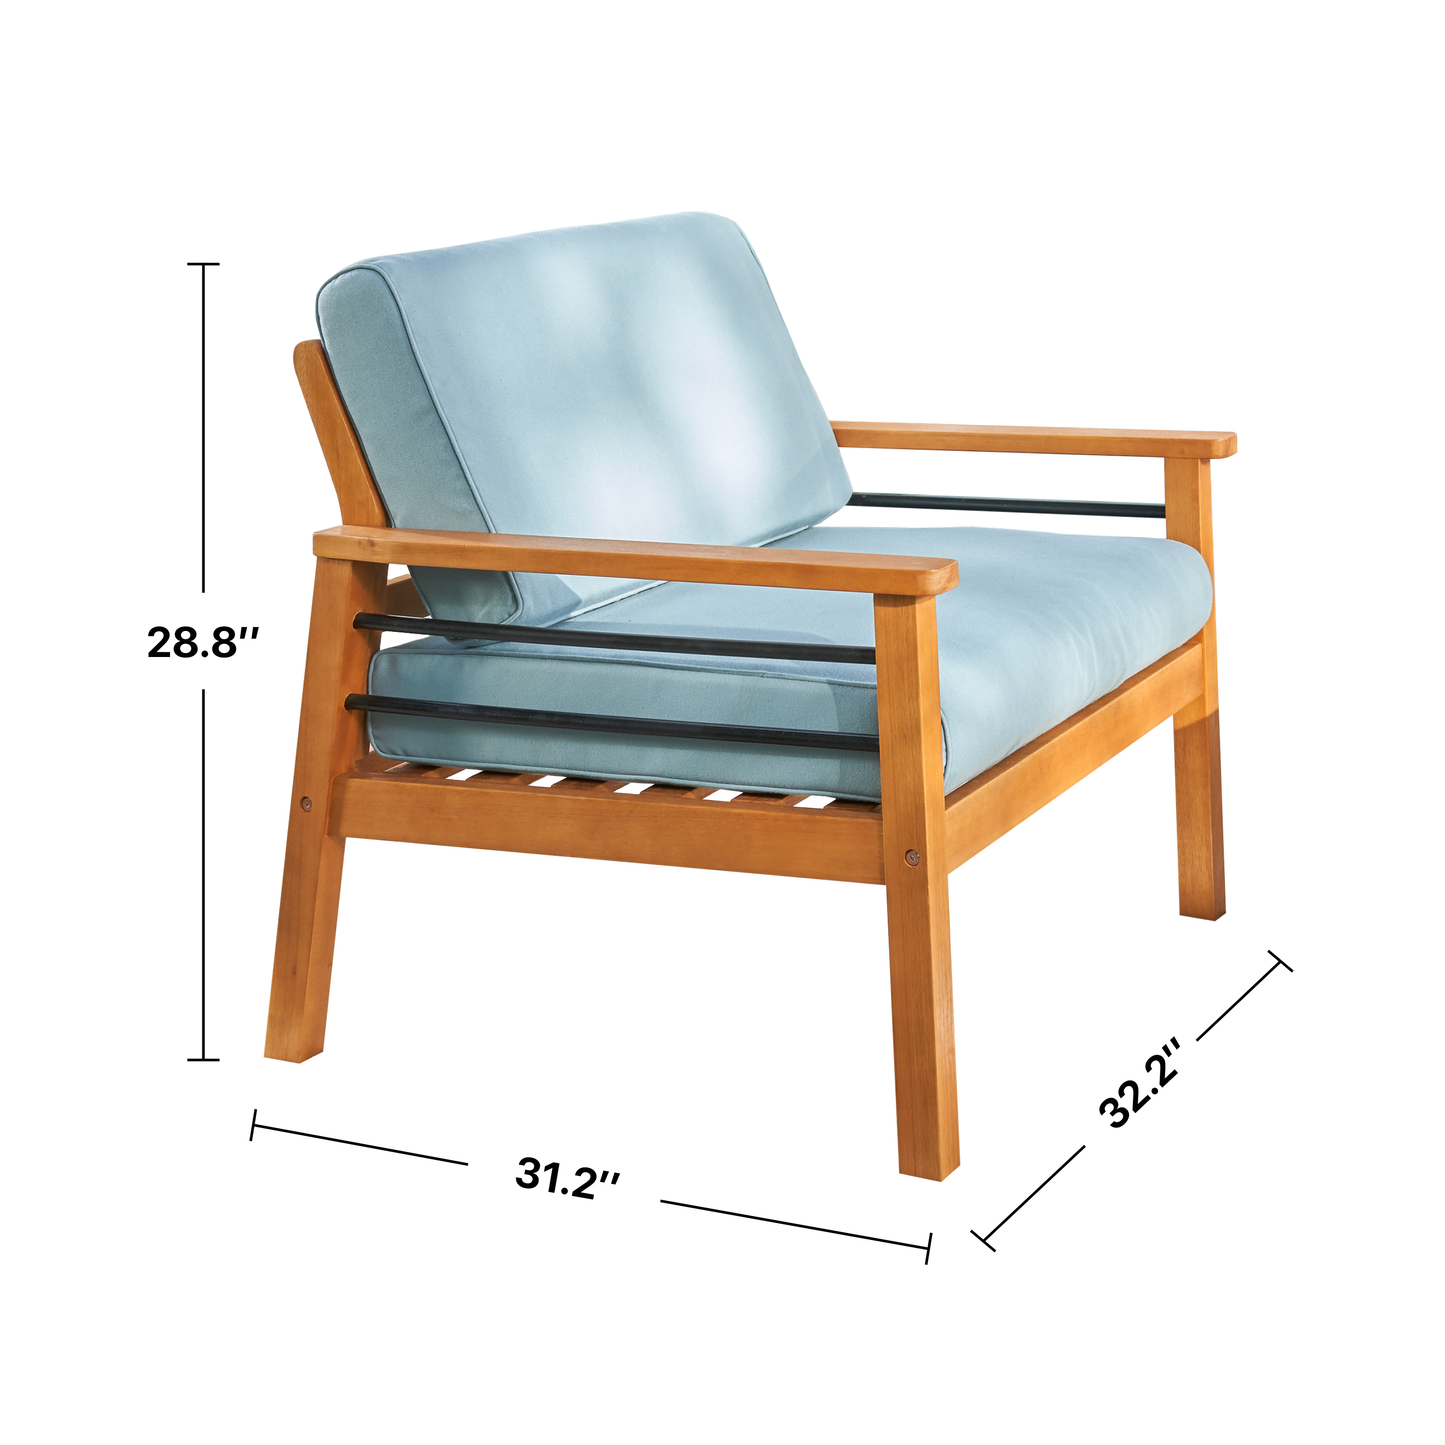 Gloucester Contemporary Outdoor Wood Chair